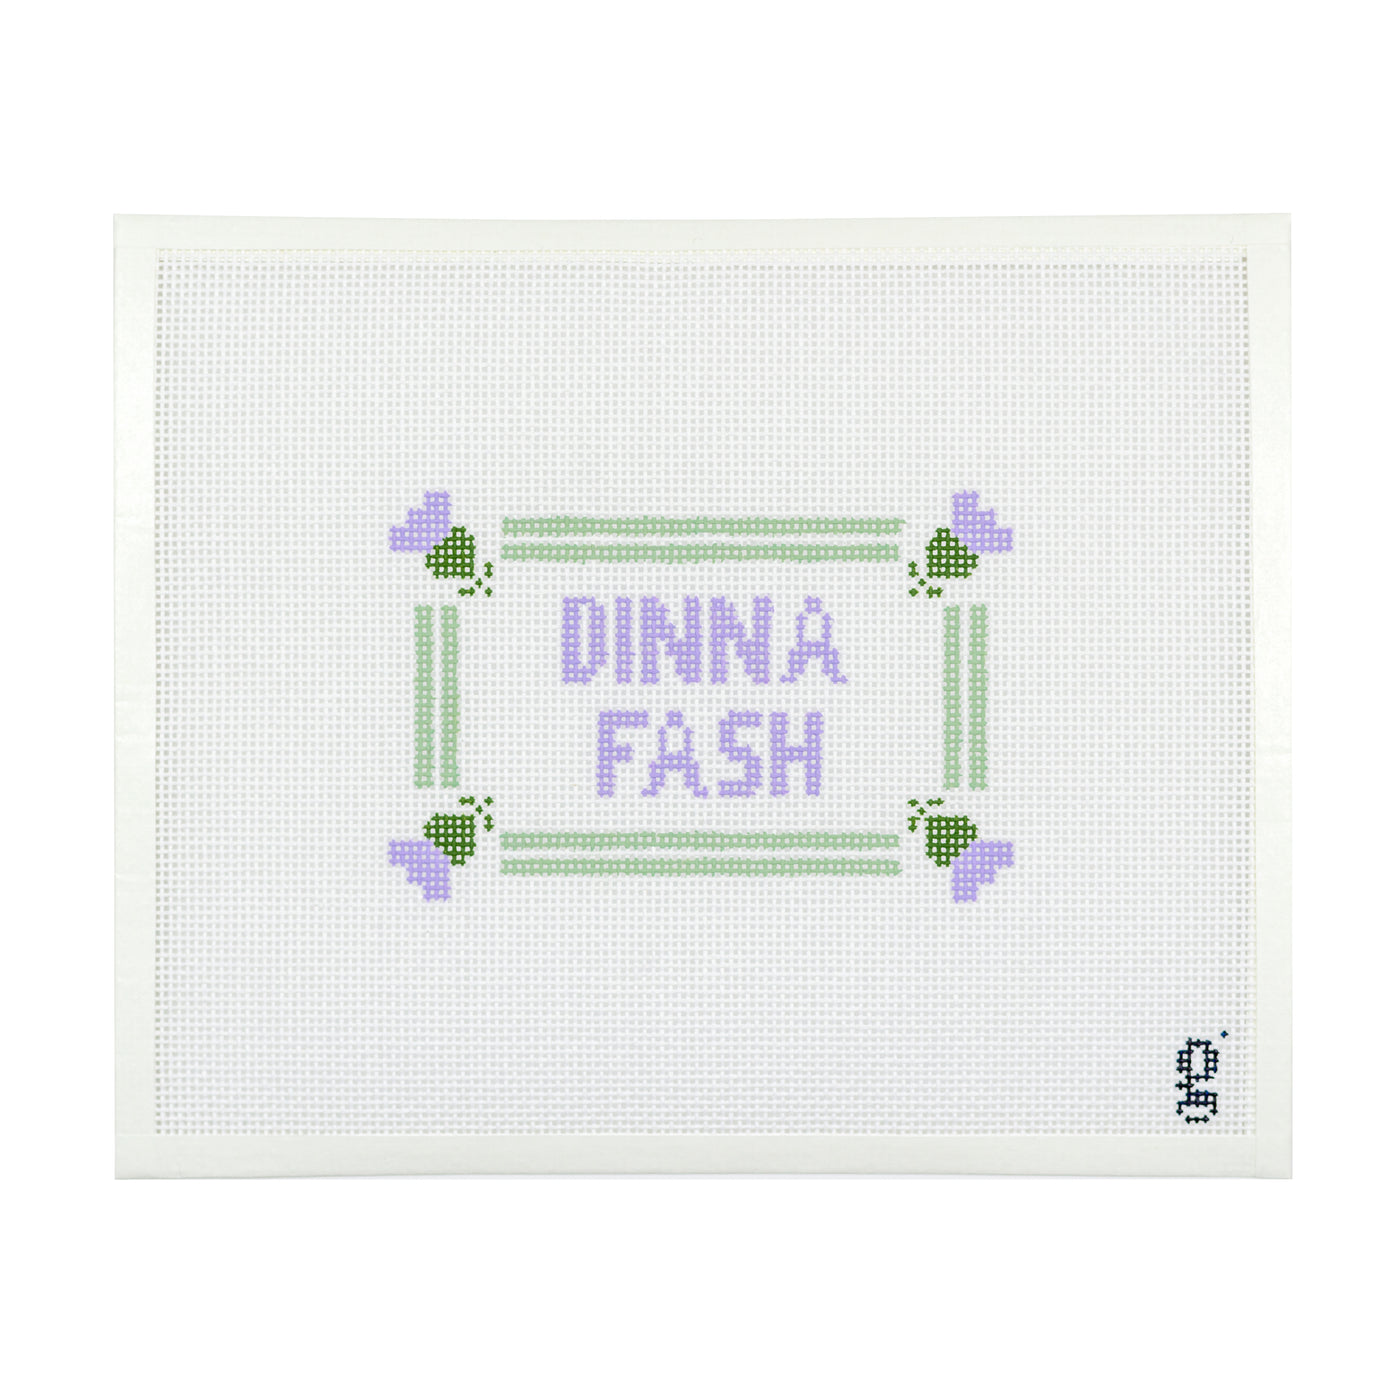 Hand painted needlepoint canvas in rectangular shape with purple and green thistle in each corner, pale green striped border and purple block letters spelling out "DINNA FASH" in center